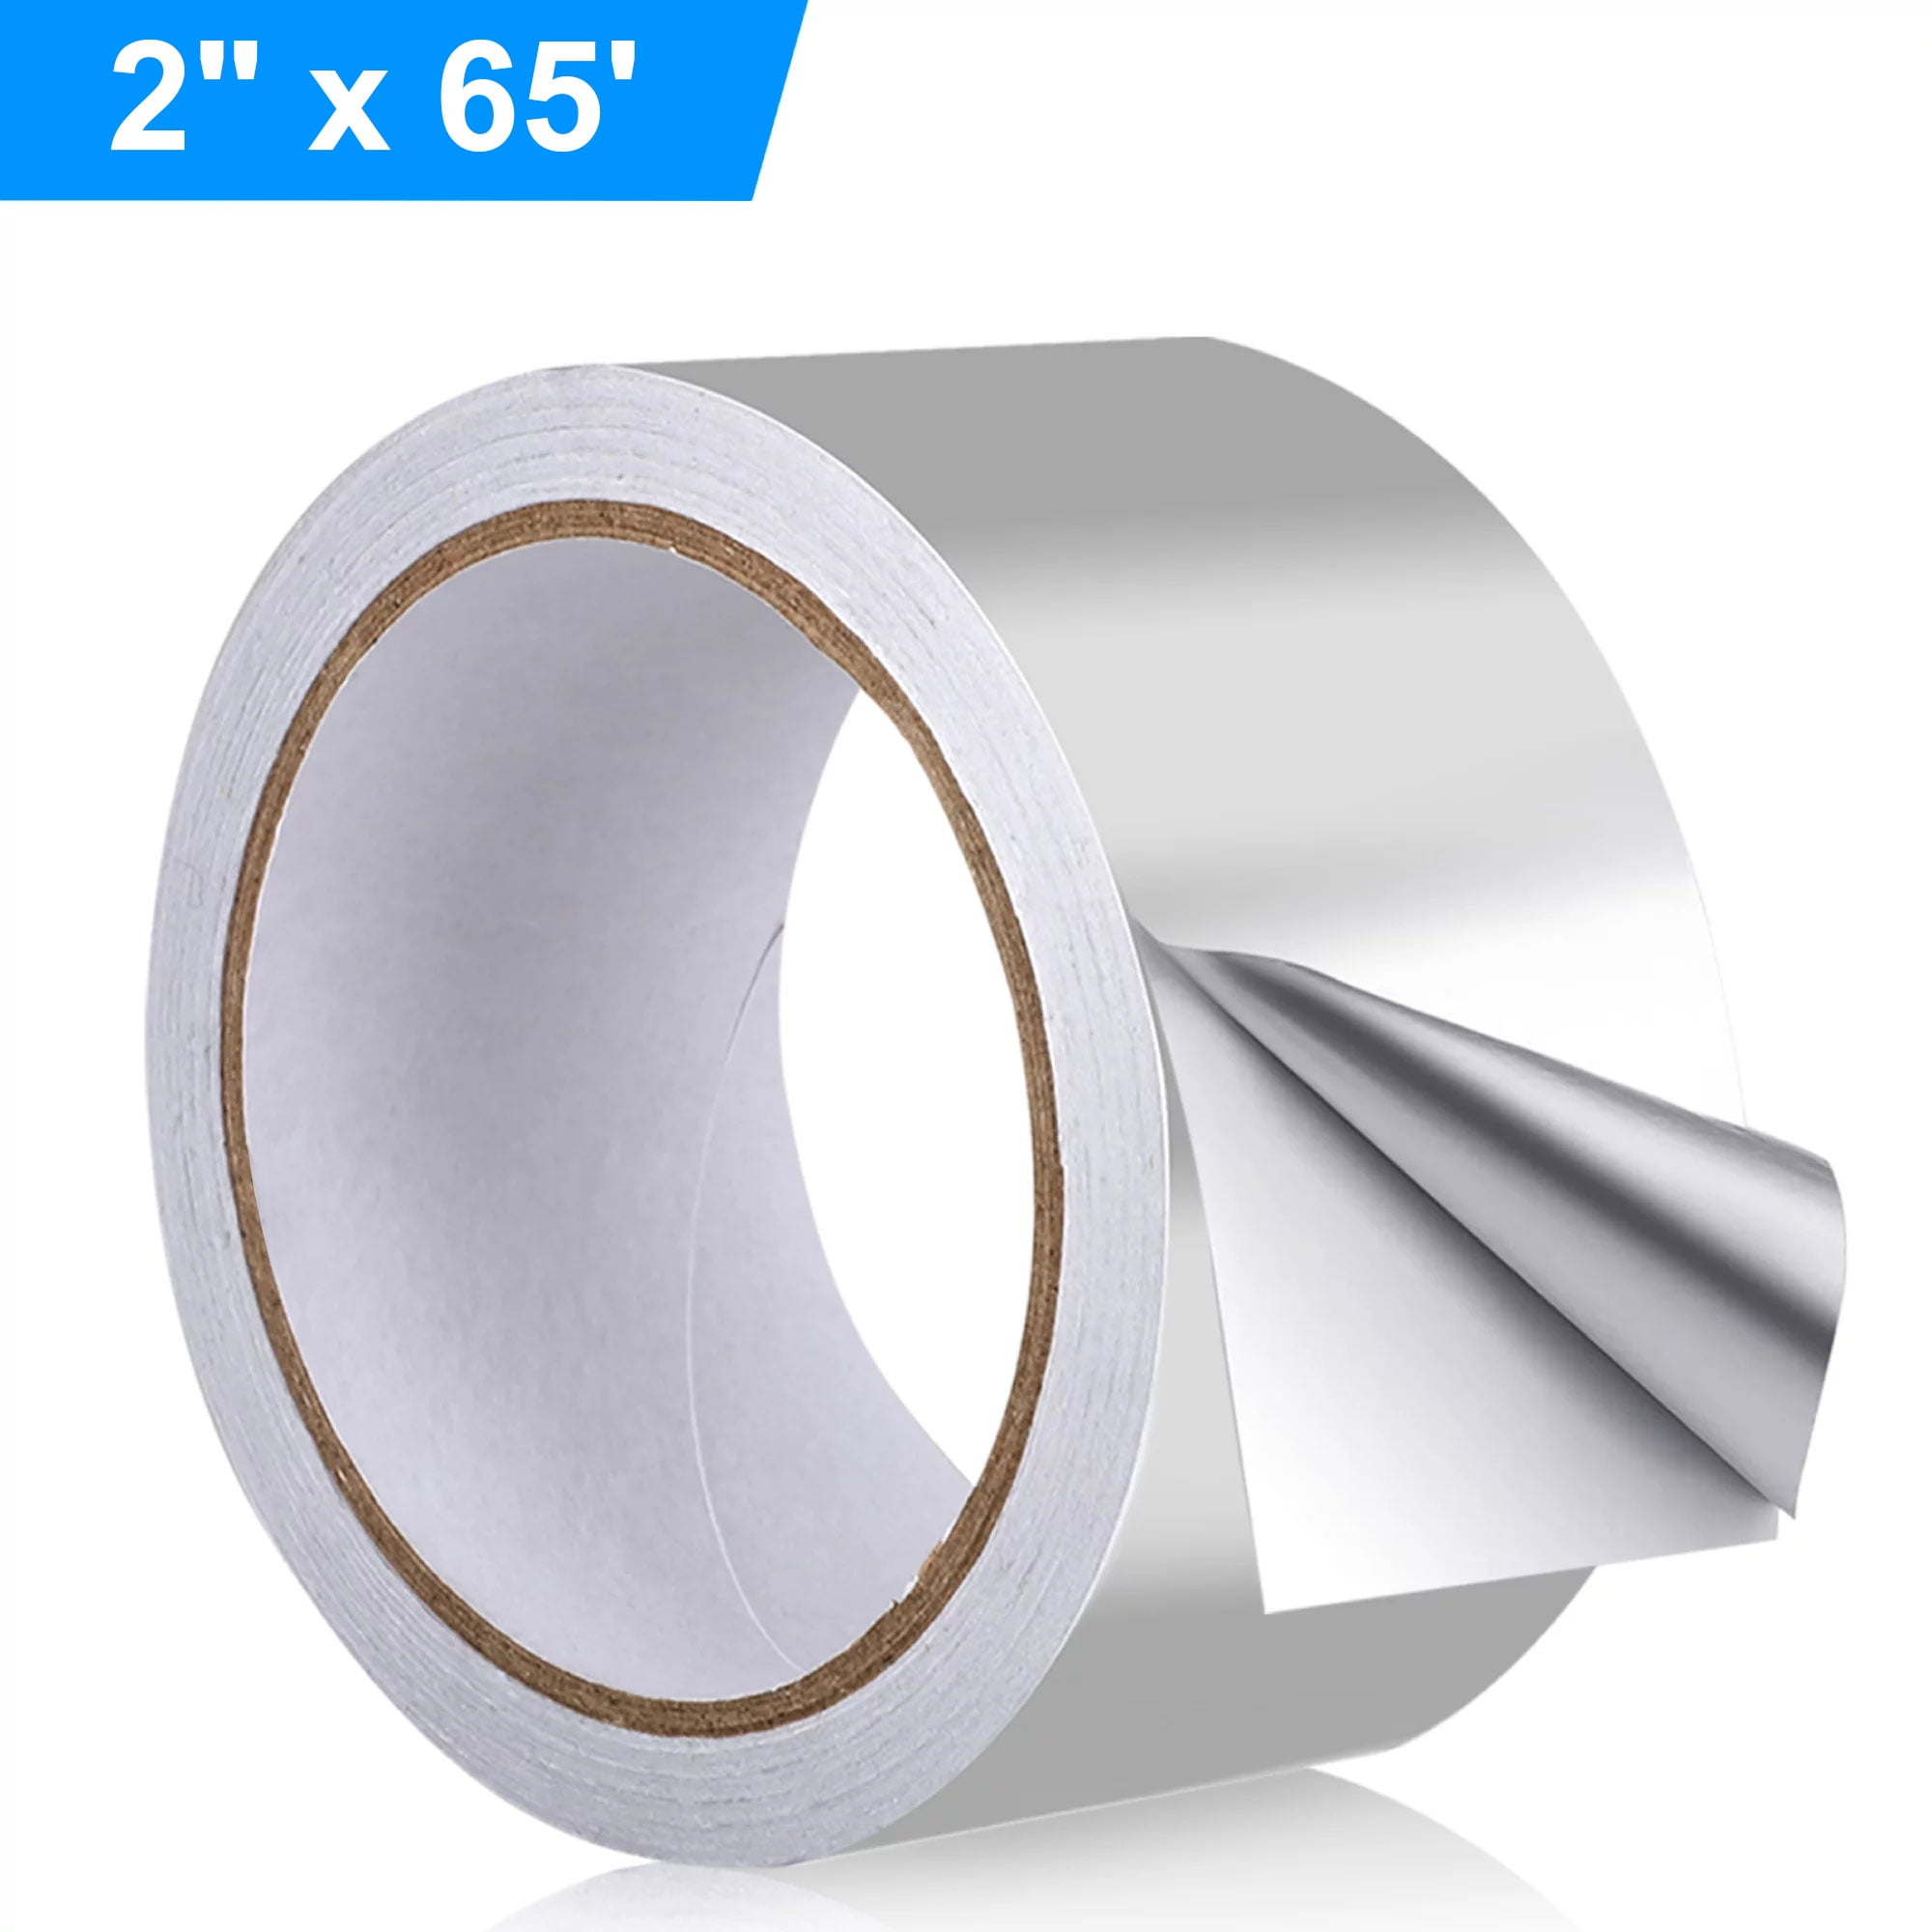 Uxcell Heat Resistant Tape High Temperature Heat Transfer Tape PTFE Film Adhesive Tape 0.98 inch Width 33ft Length Black